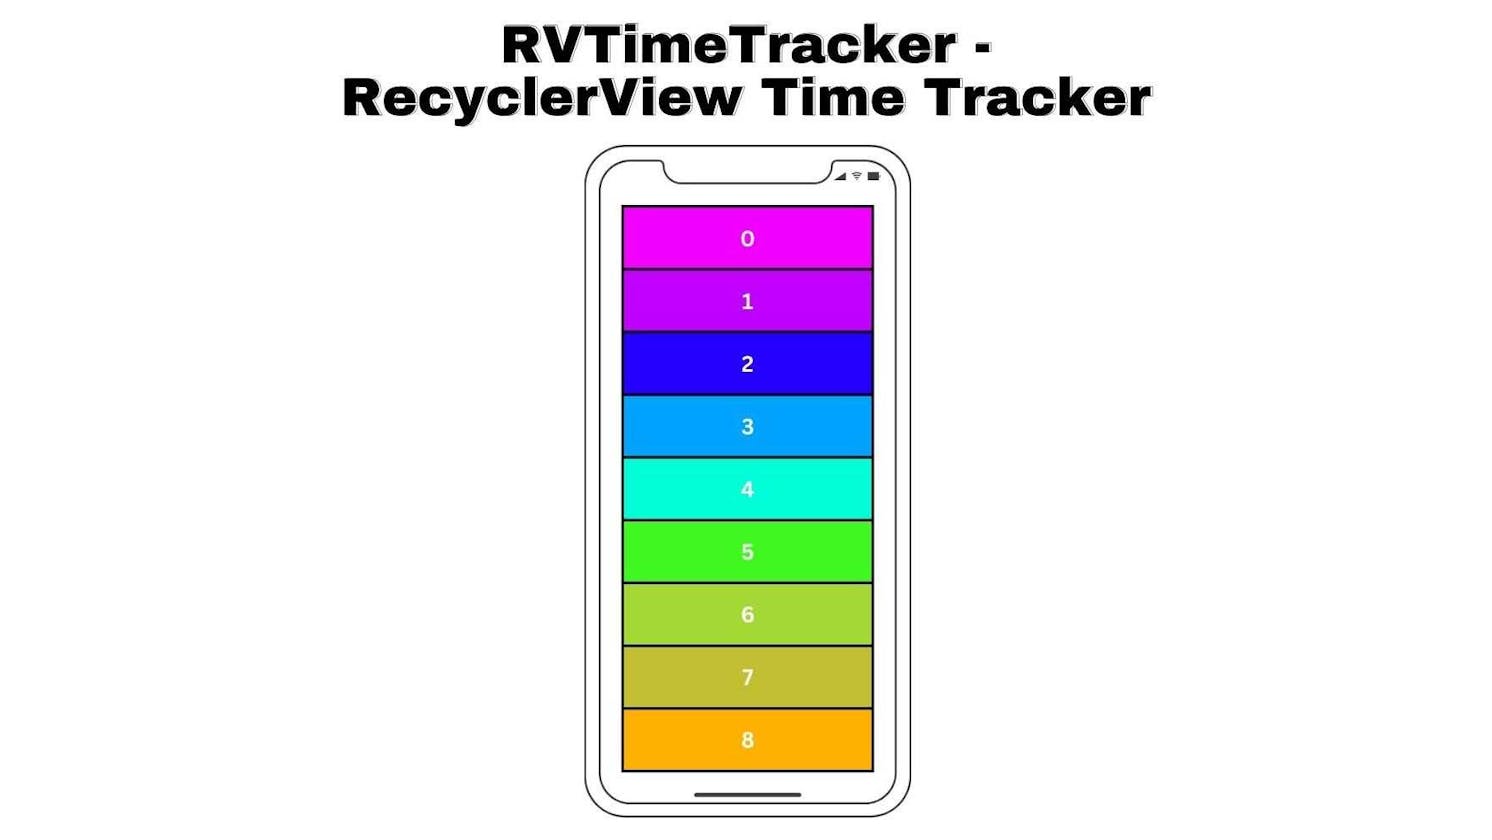 Introducing RVTimeTracker - RecyclerView Time Tracker